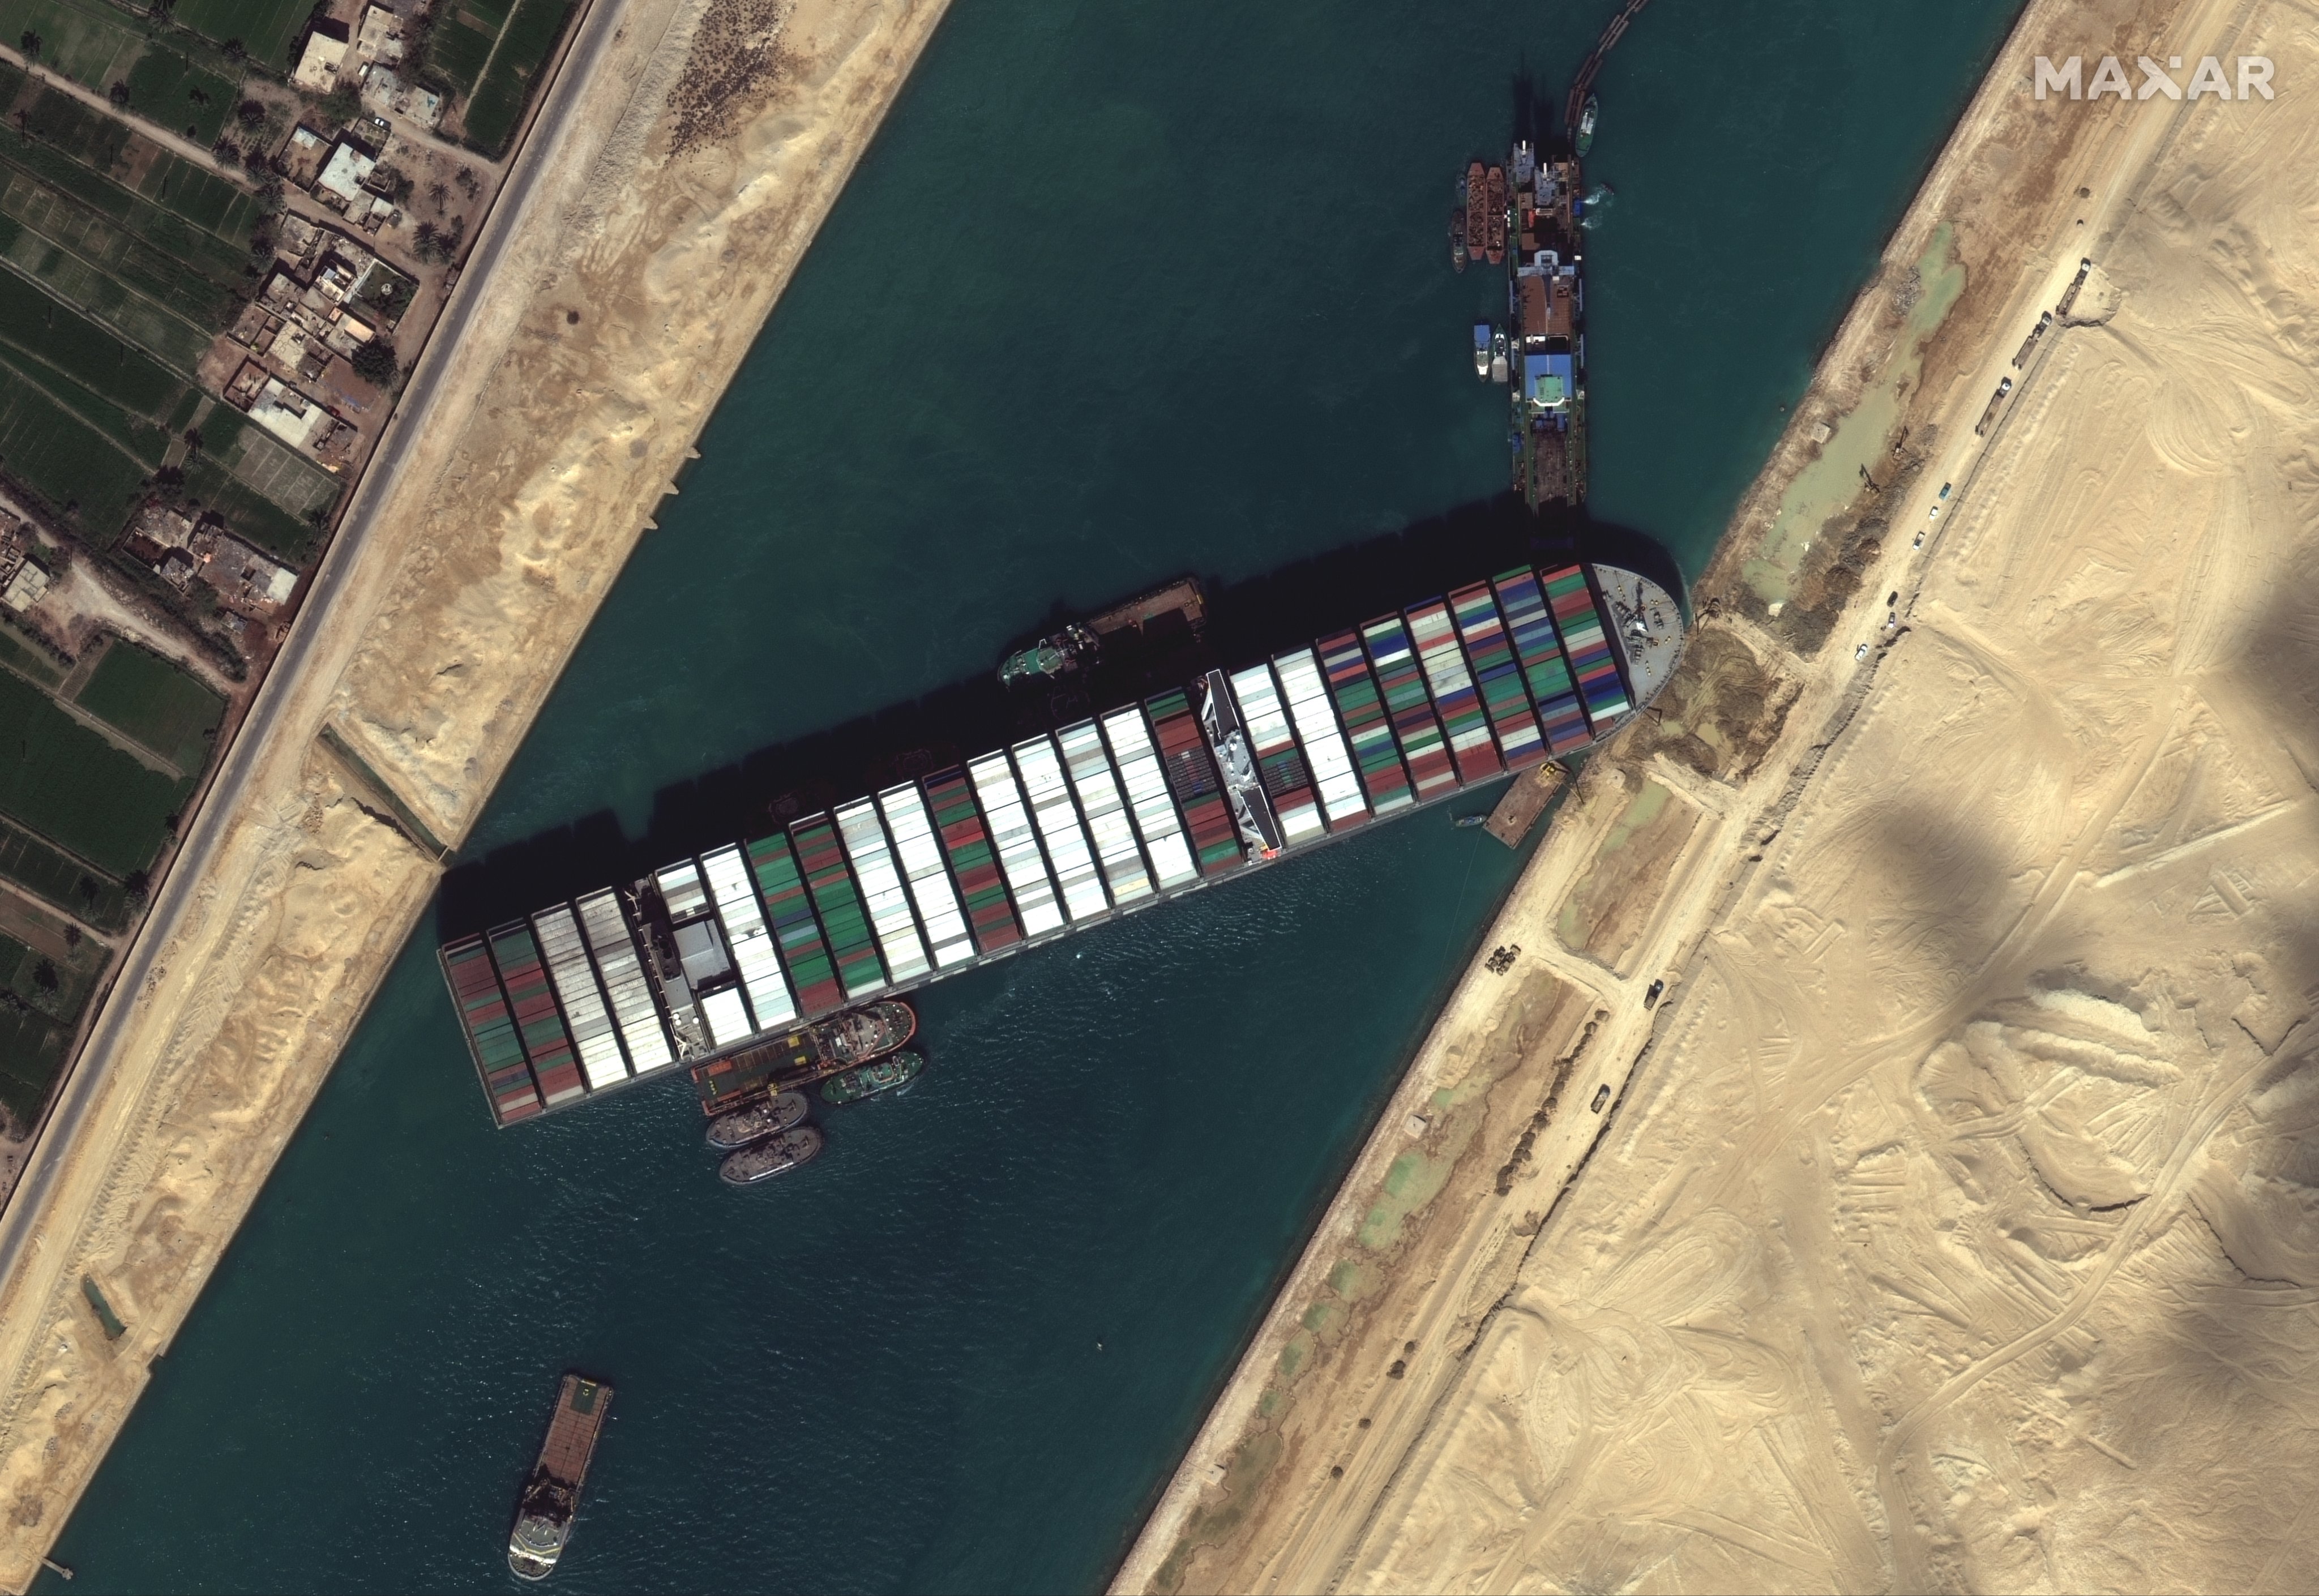 The Suez Canal situation is a nice break from the usual contentious media coverage